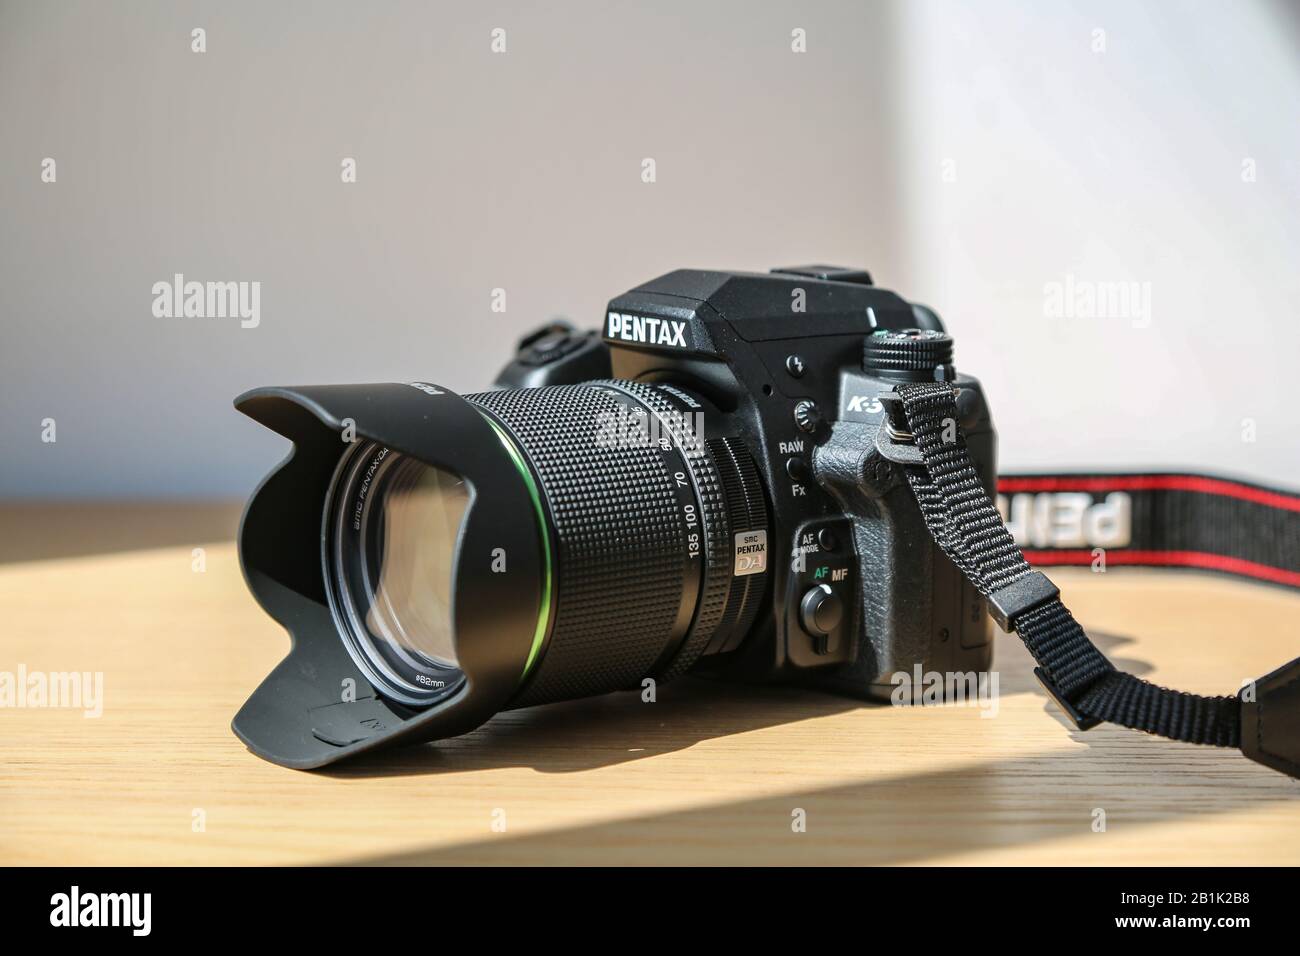 Waterproof DSLR Pentax K3 camera body with 18-135mm lens kit on wooden  table under sunlight Stock Photo - Alamy